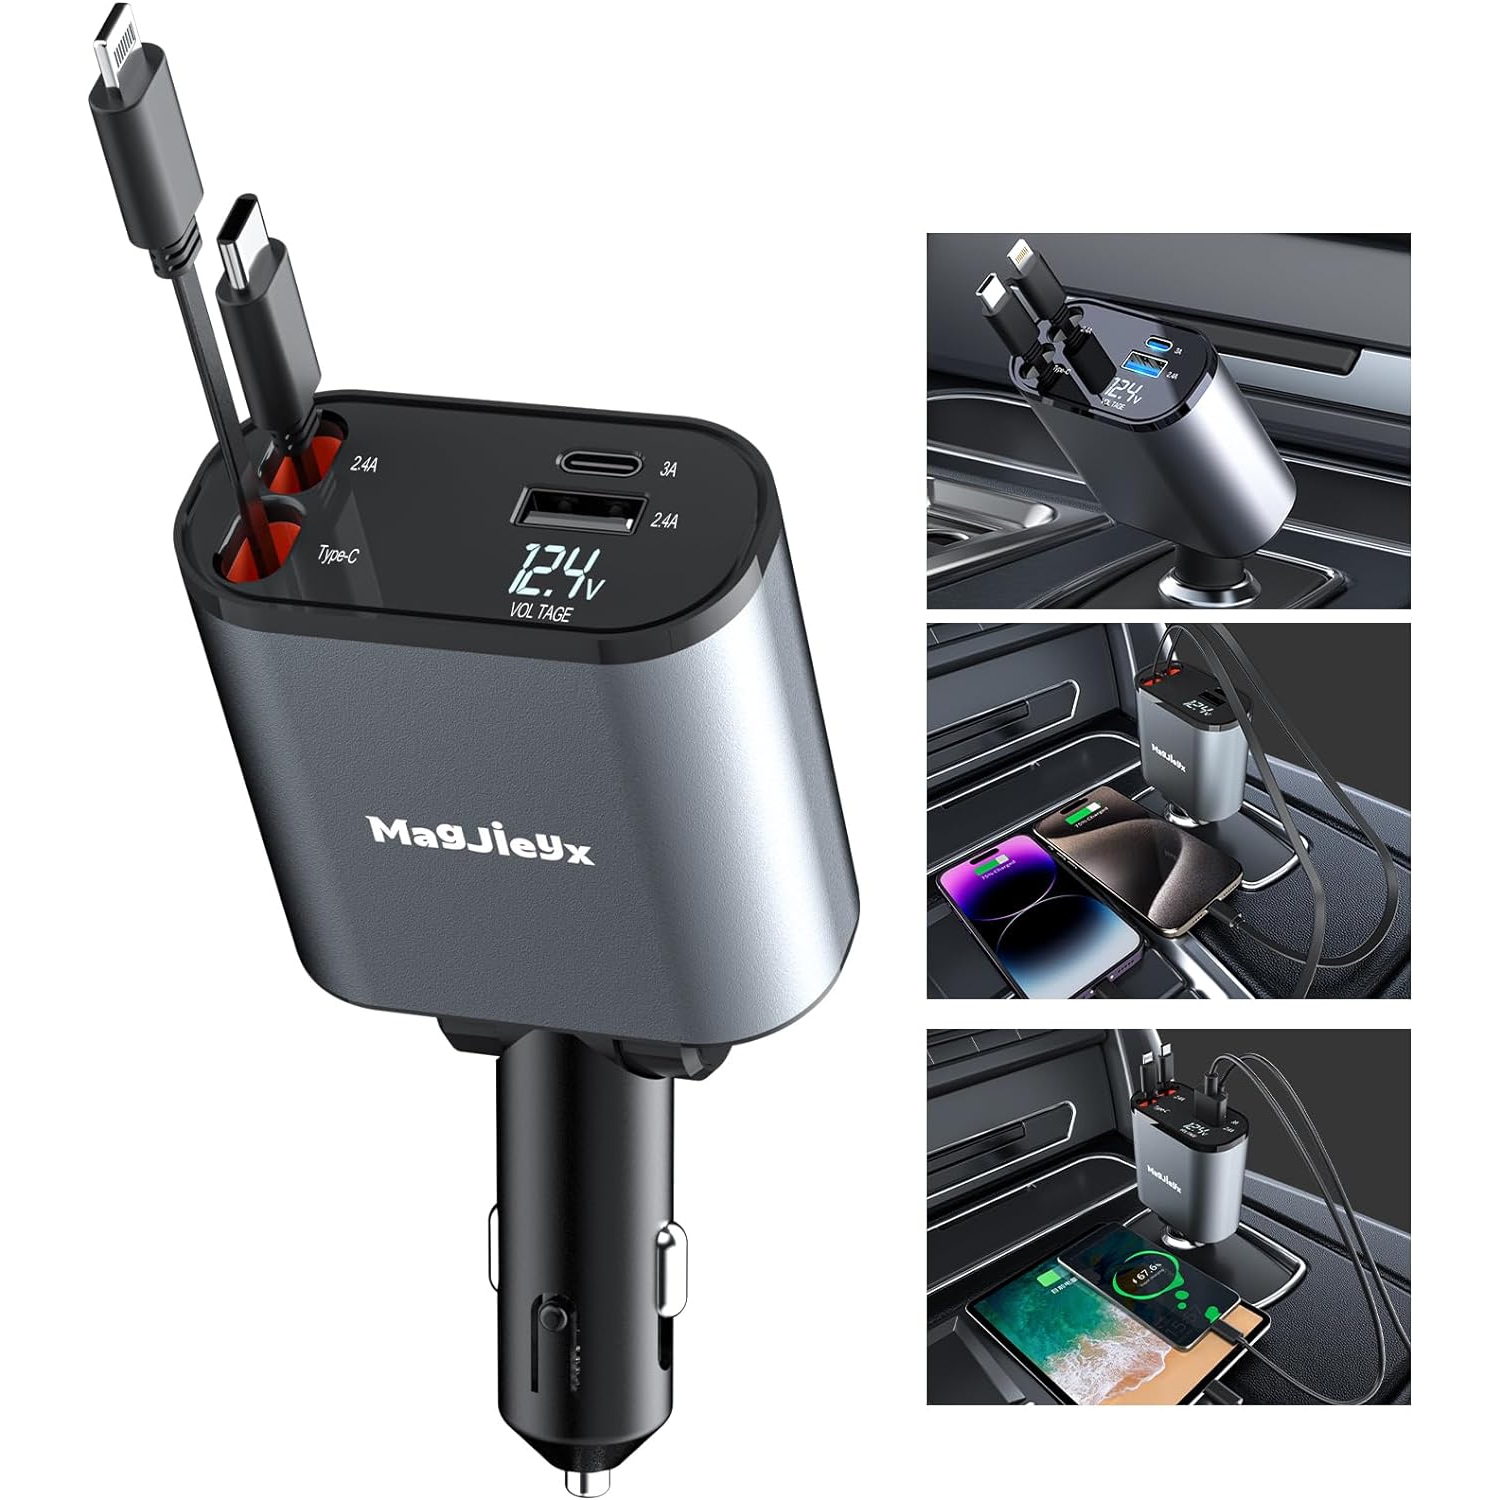 4 in 1 Retractable Car Charger - USB C, iPhone 15/14/13 Pro Max Plus, iPad, AirPods, Samsung Galaxy S23/S22/S10, Google. Includes Lightning cable and dual charge port.